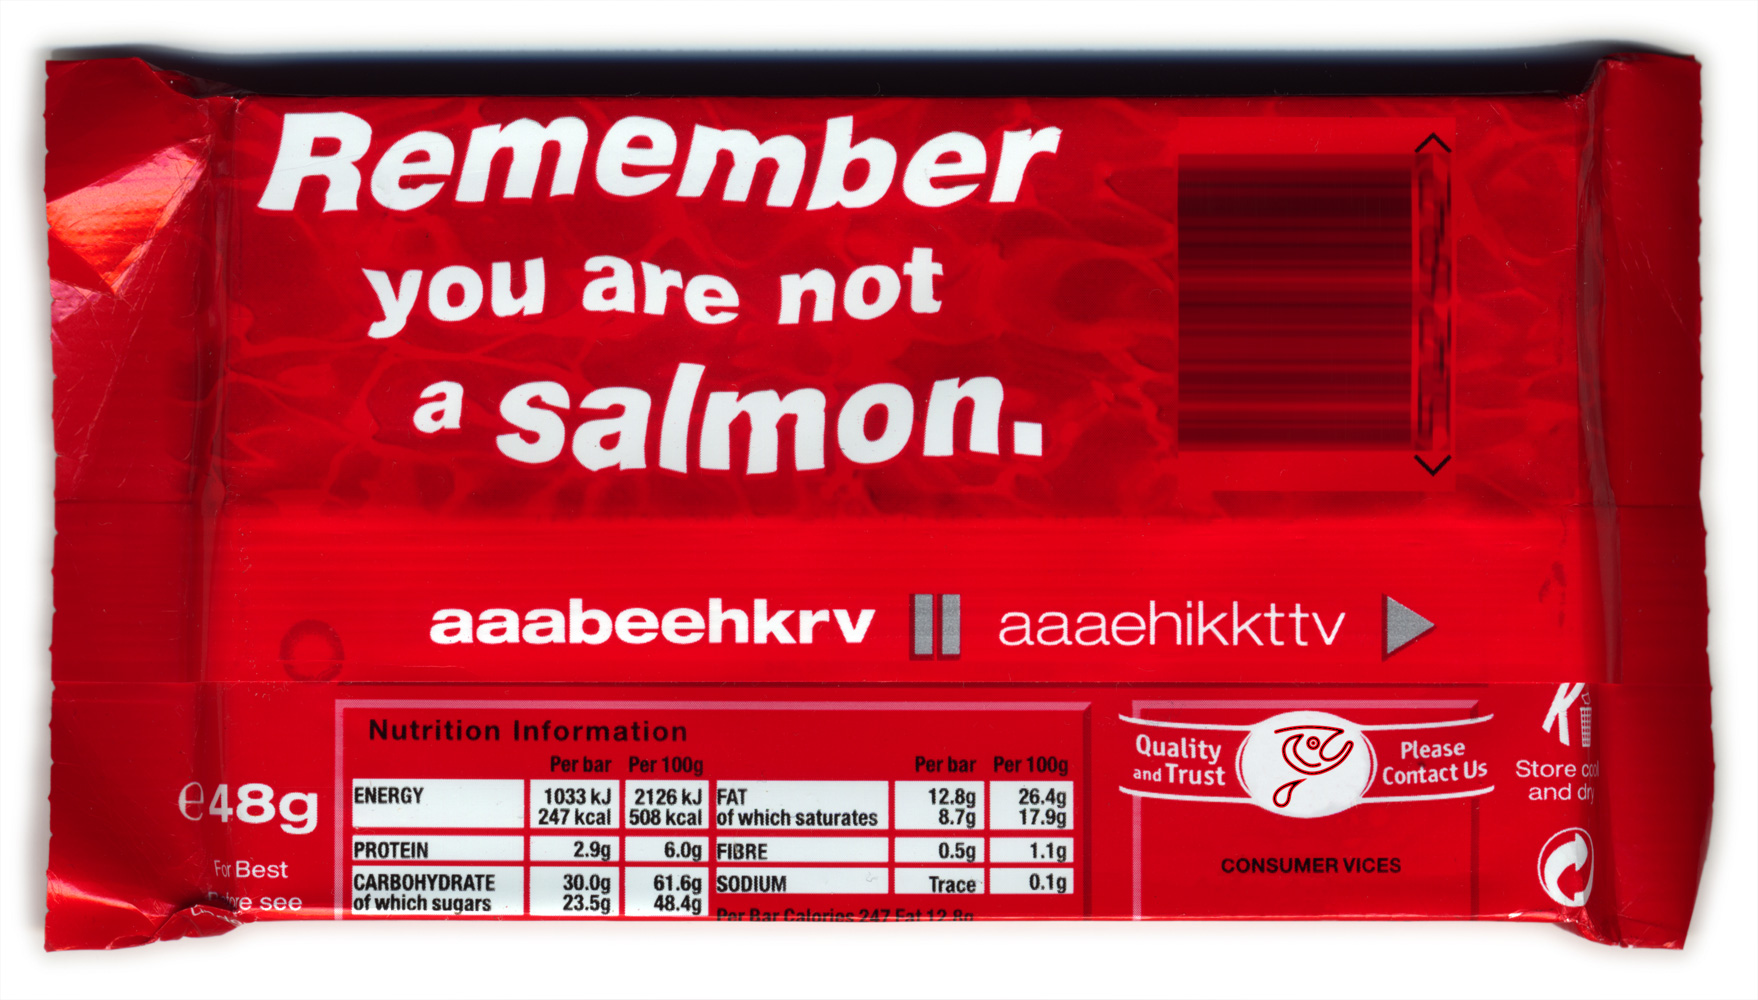 Remember you are not a salmon - choc bar wrapper